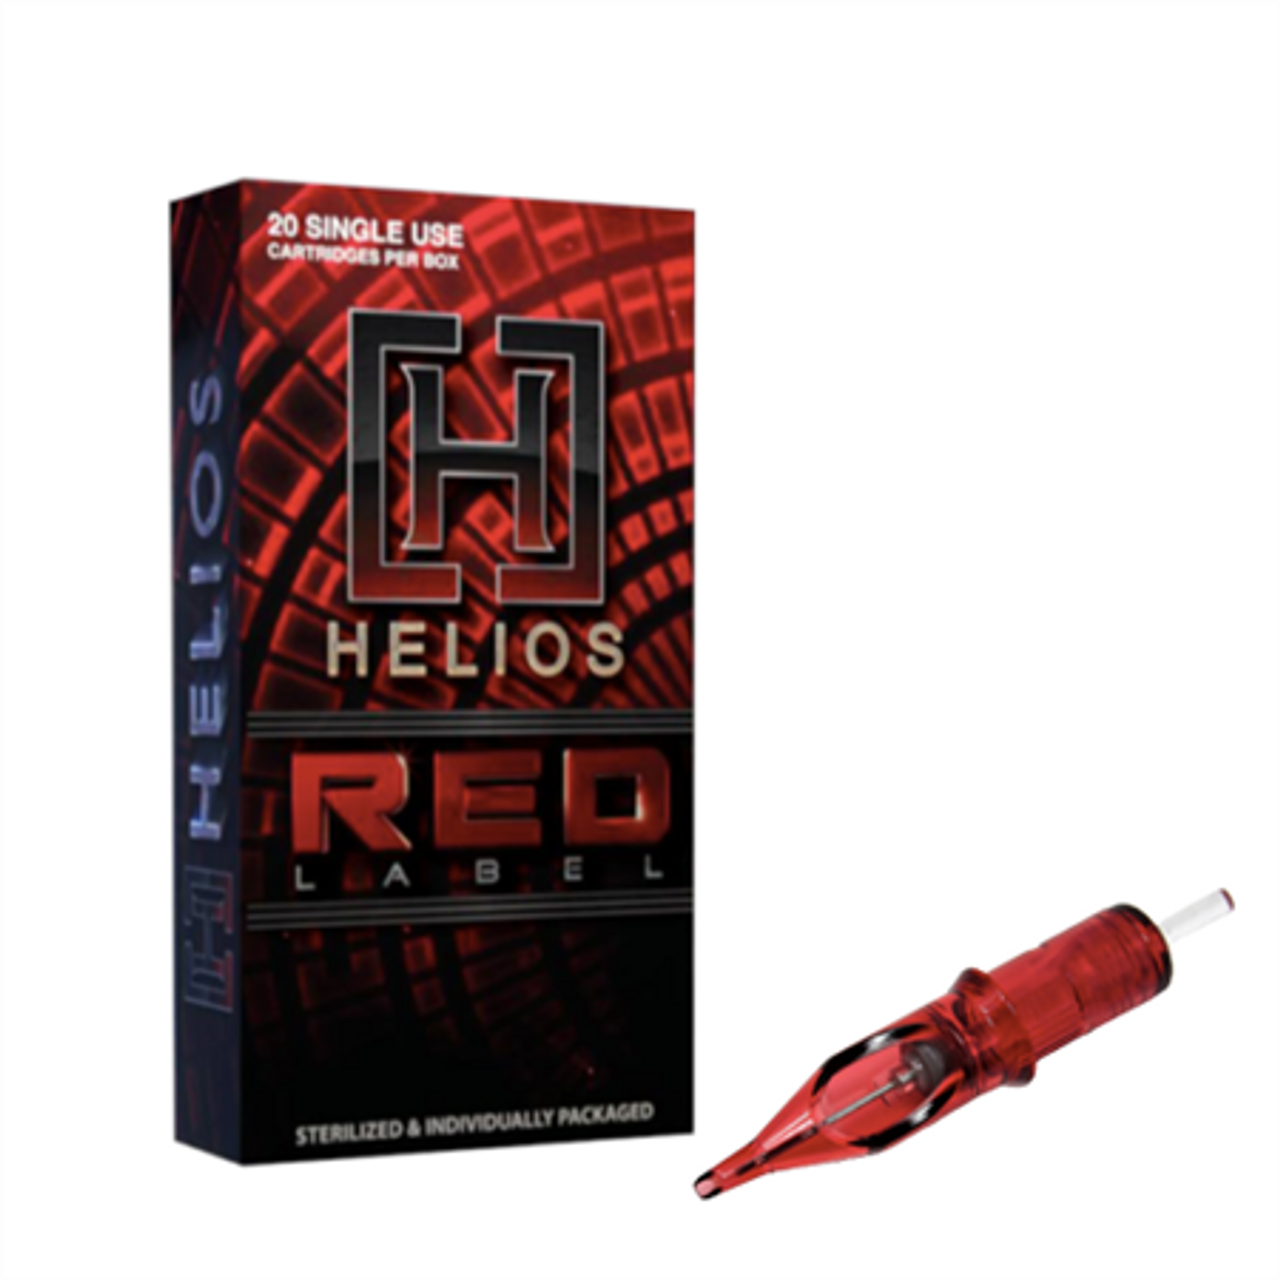 HELIOS Red Label - #10 Curved Magnum Bug Pin Cartridges